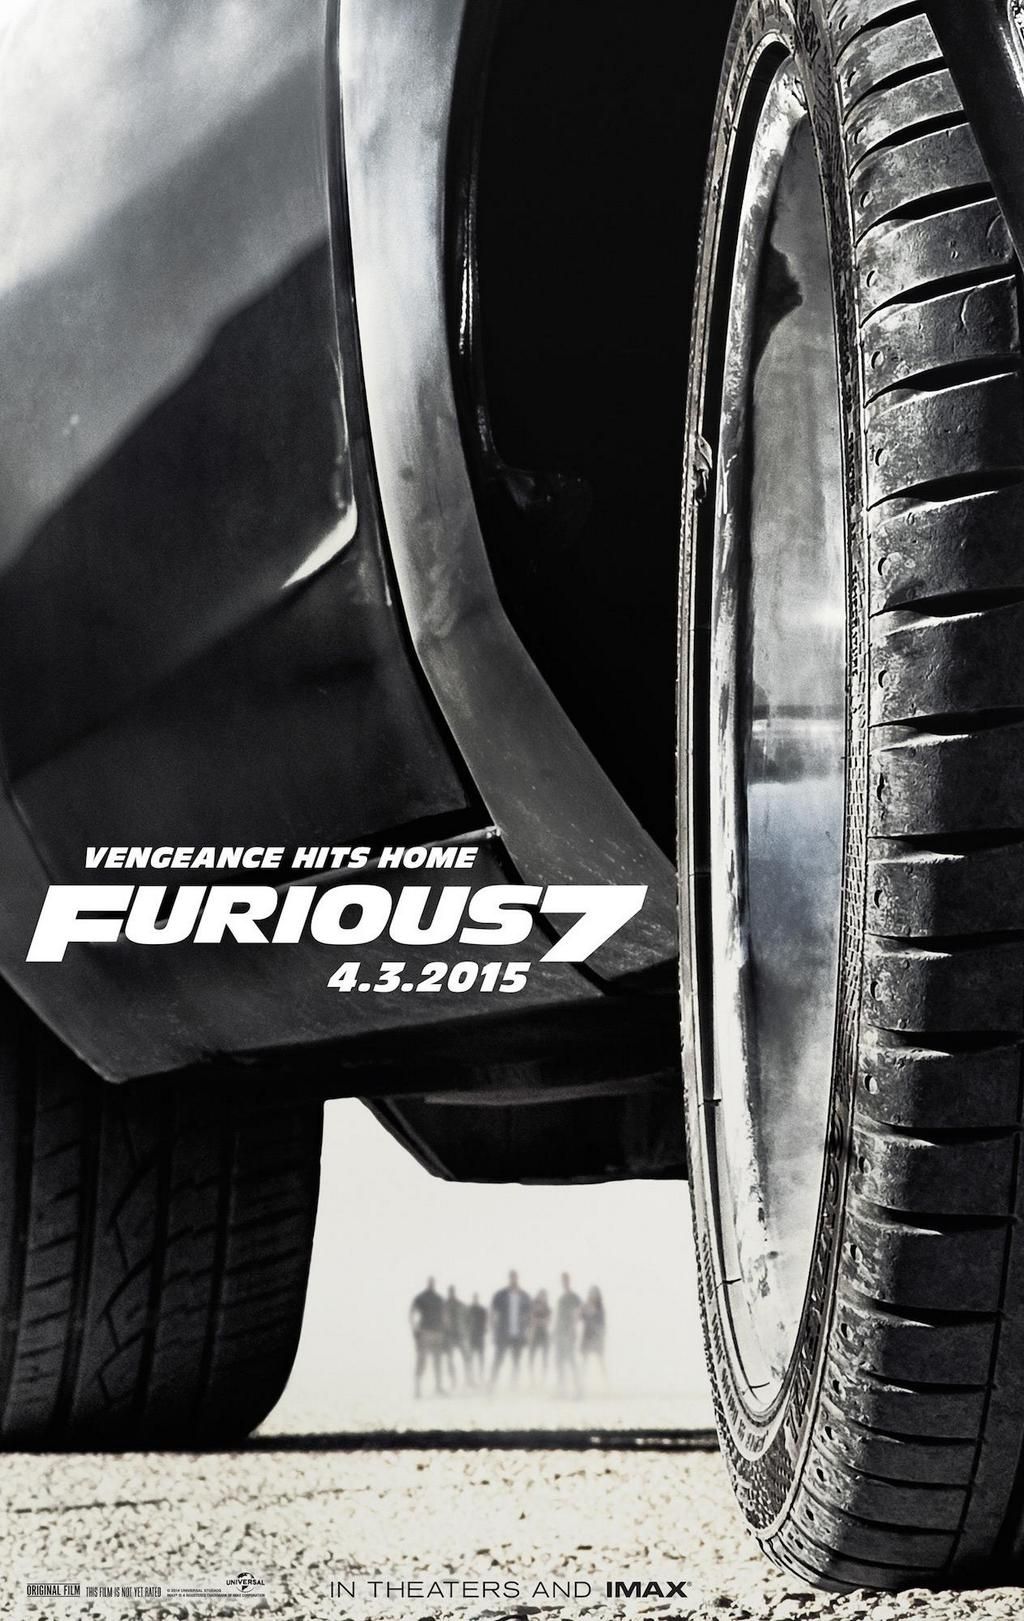 'Furious 7' Trailer: Jason Statham Goes to War with the Family. | Collider